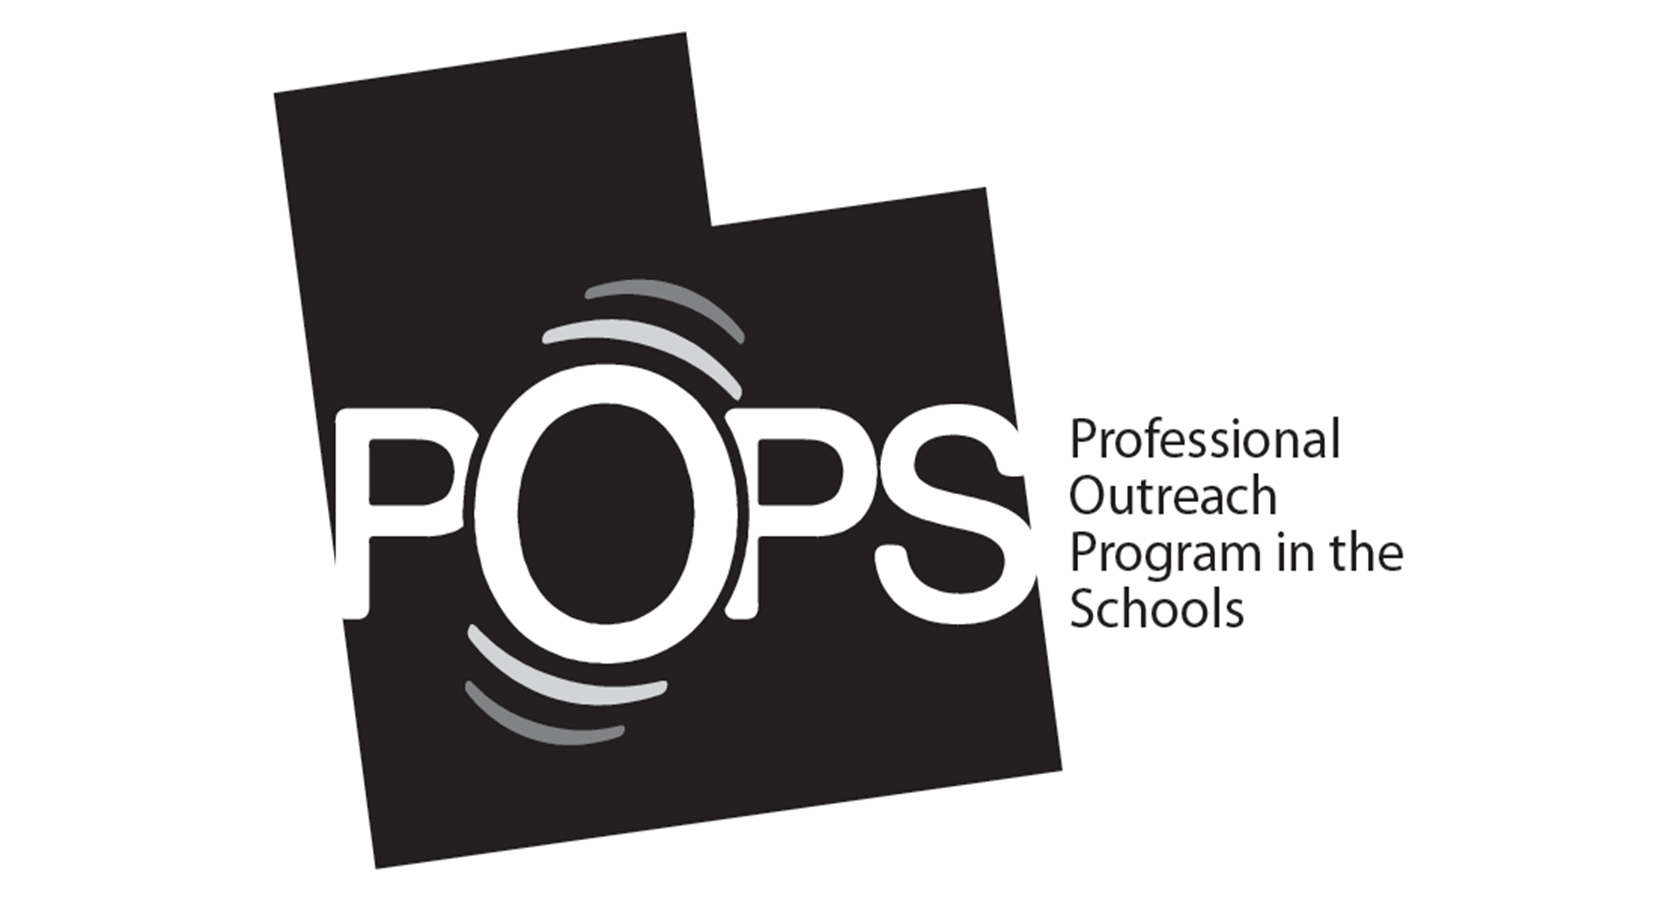 POPs Professional Outreach Programs in Schools